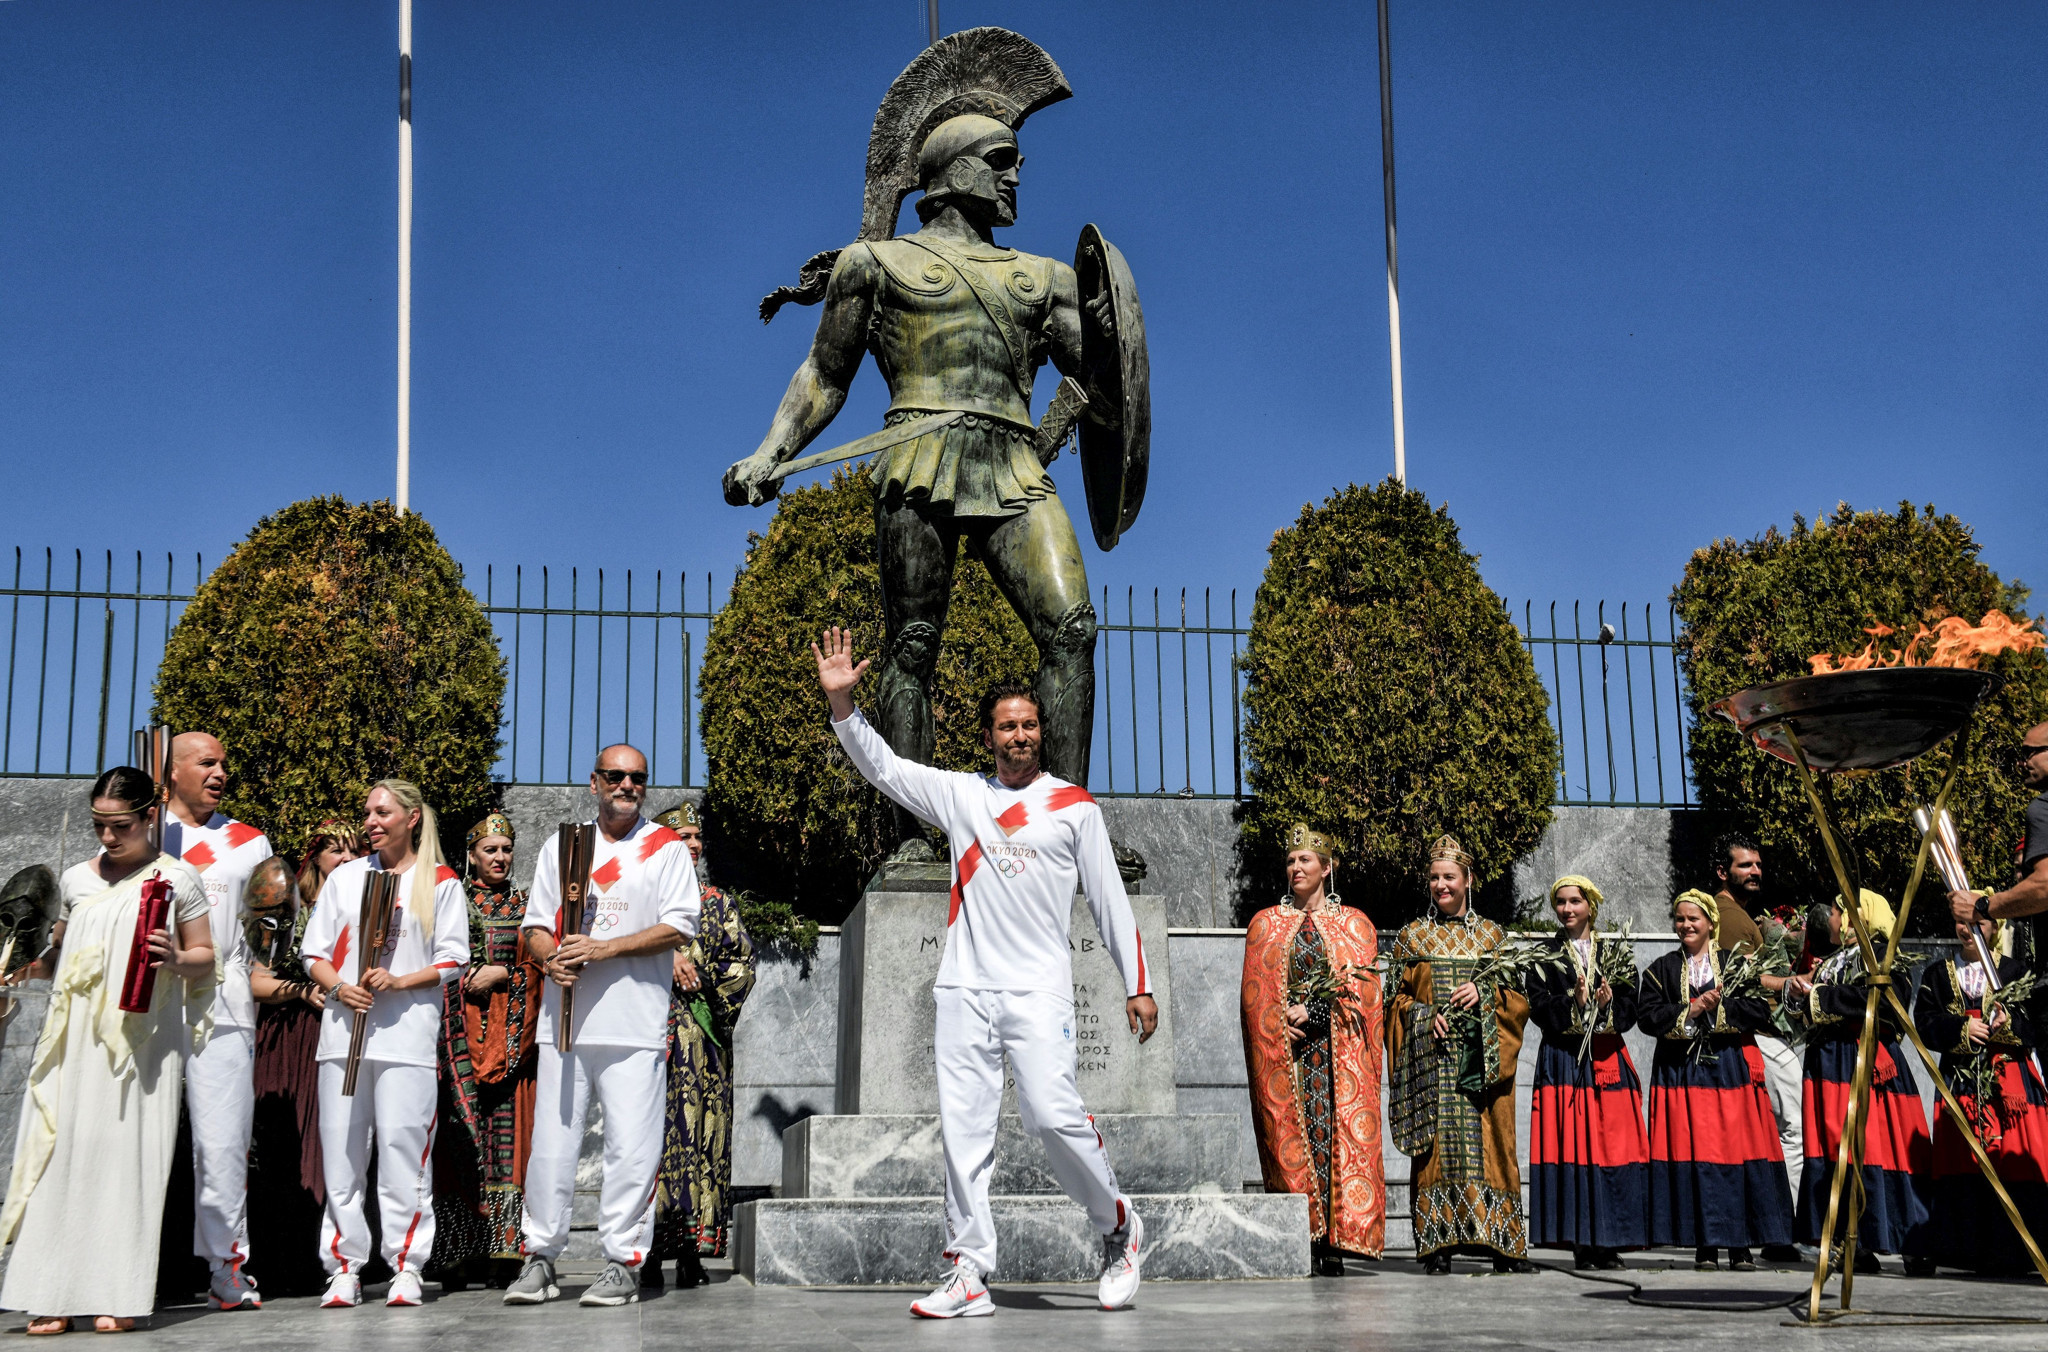 Greek leg of Olympic Torch Relay cancelled over "unexpectedly large crowds"